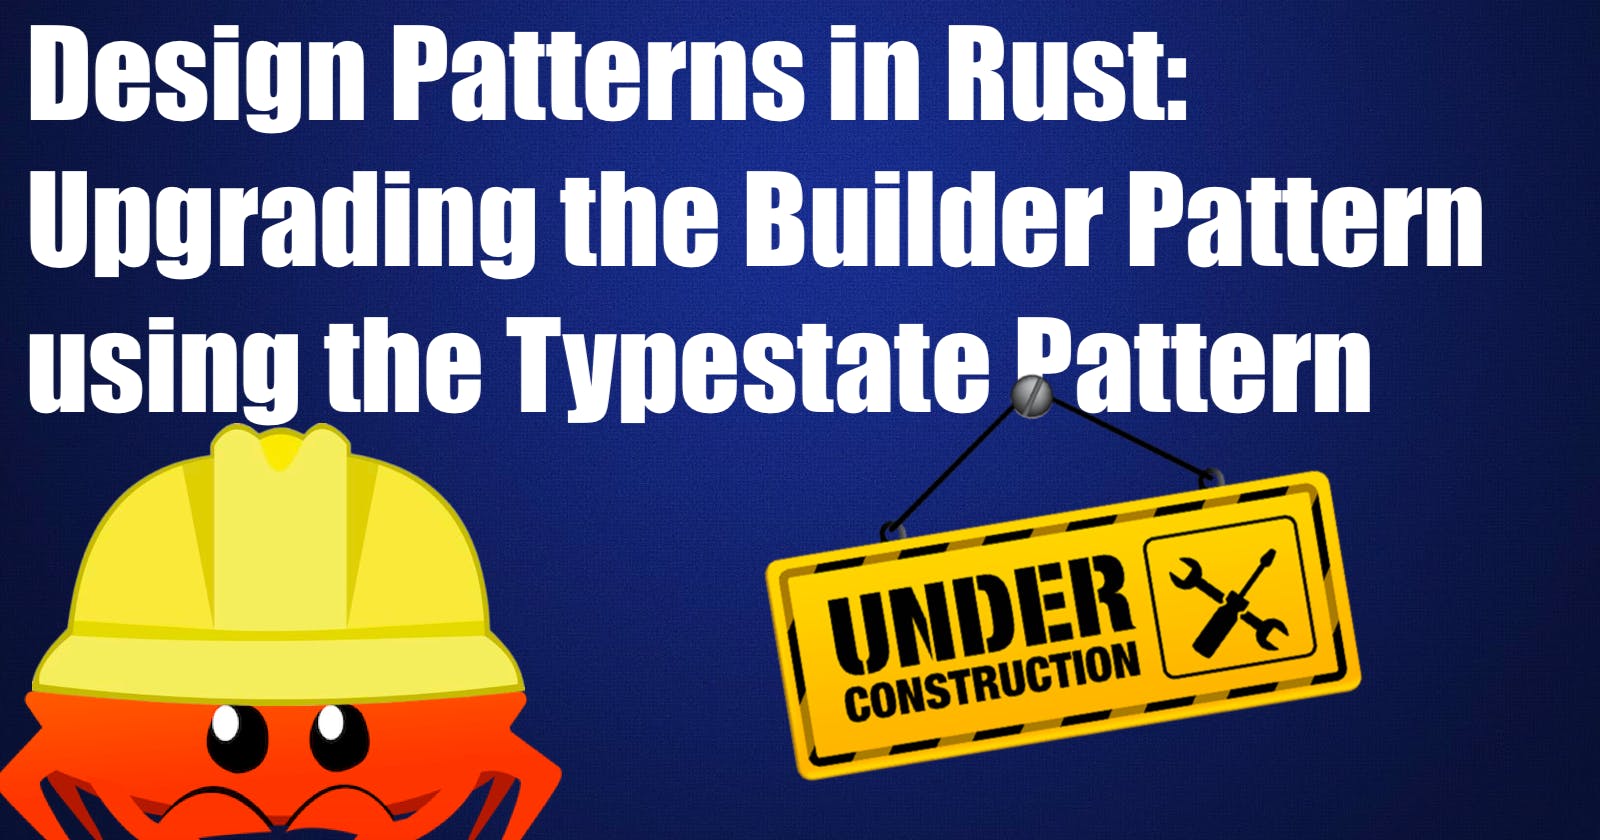 Design Patterns in Rust 🦀: Upgrading the Builder Pattern using the Typestate Pattern